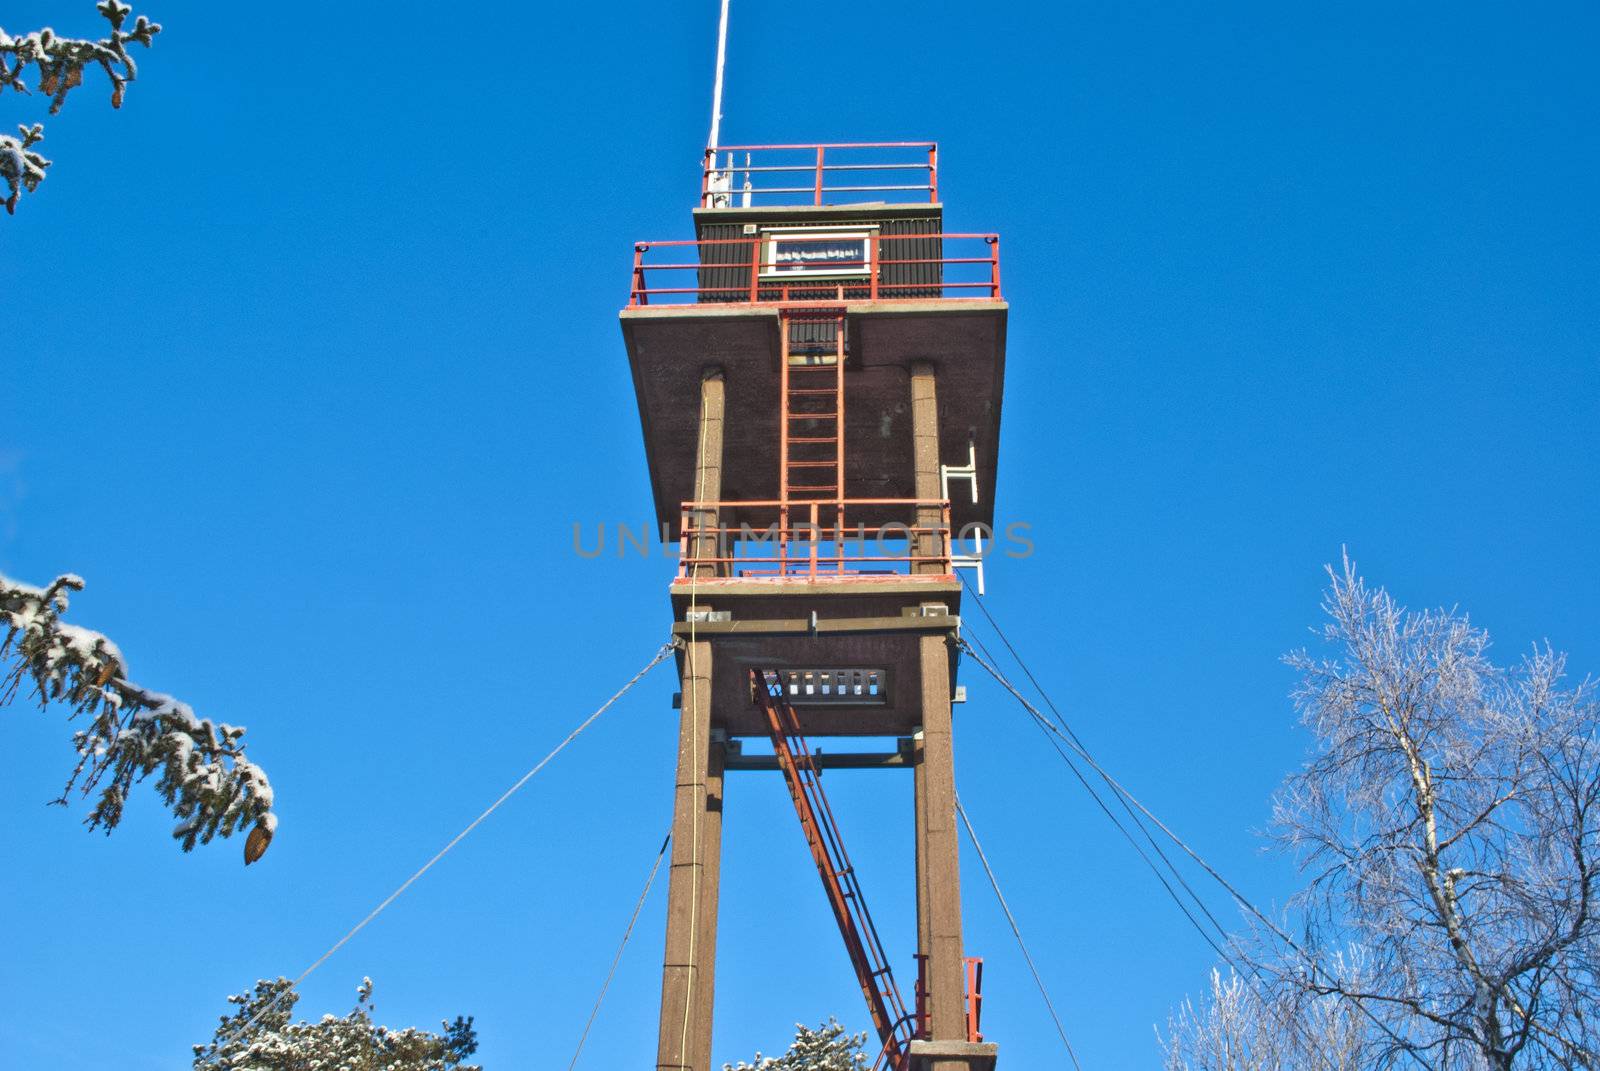 Forest fire tower. (4) by steirus